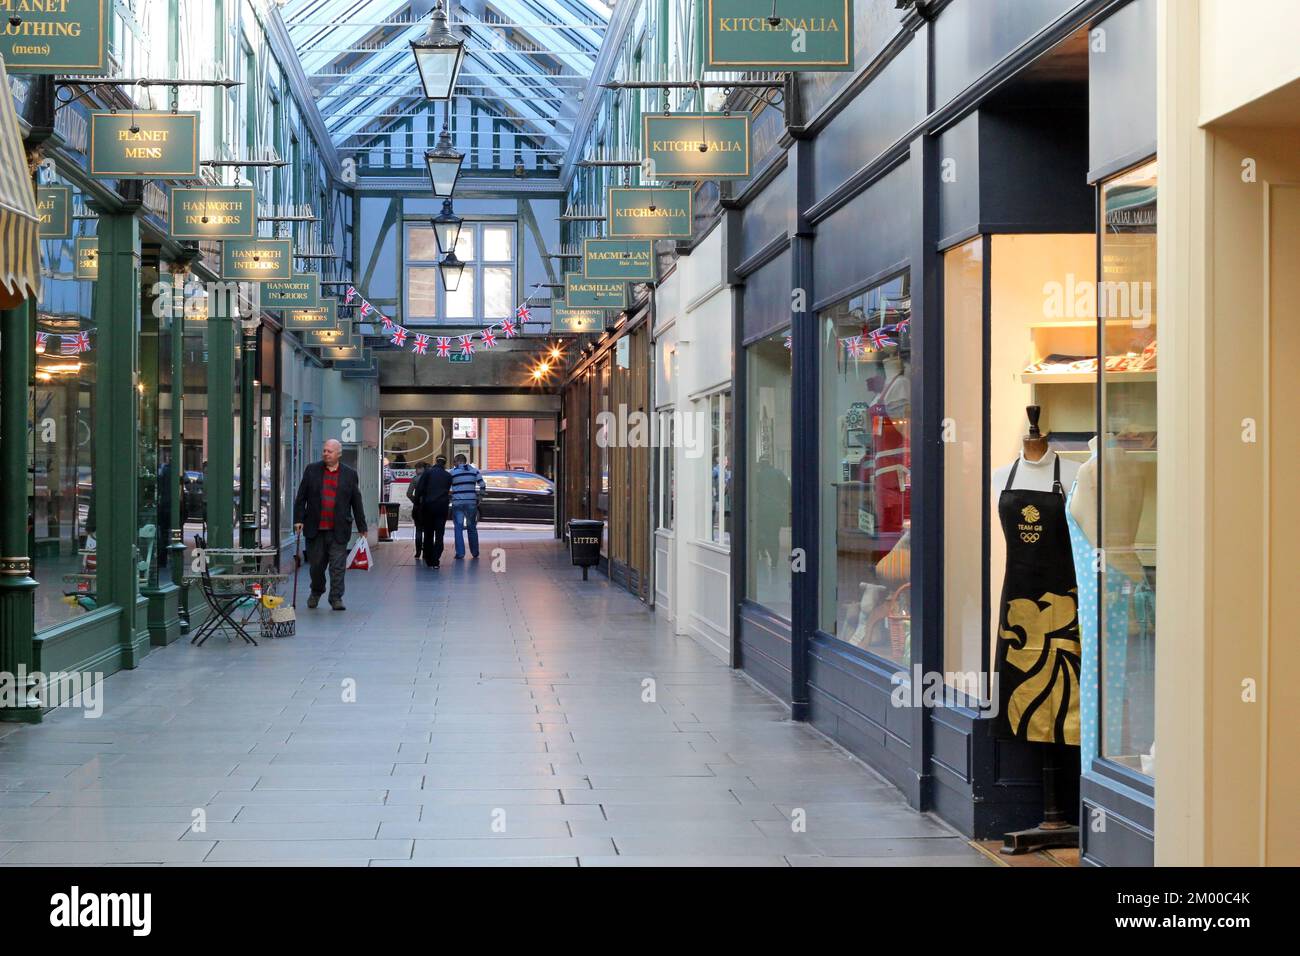 The arcade in Bedford, United Kingdom. A shopping arcade in the town centre. Stock Photo